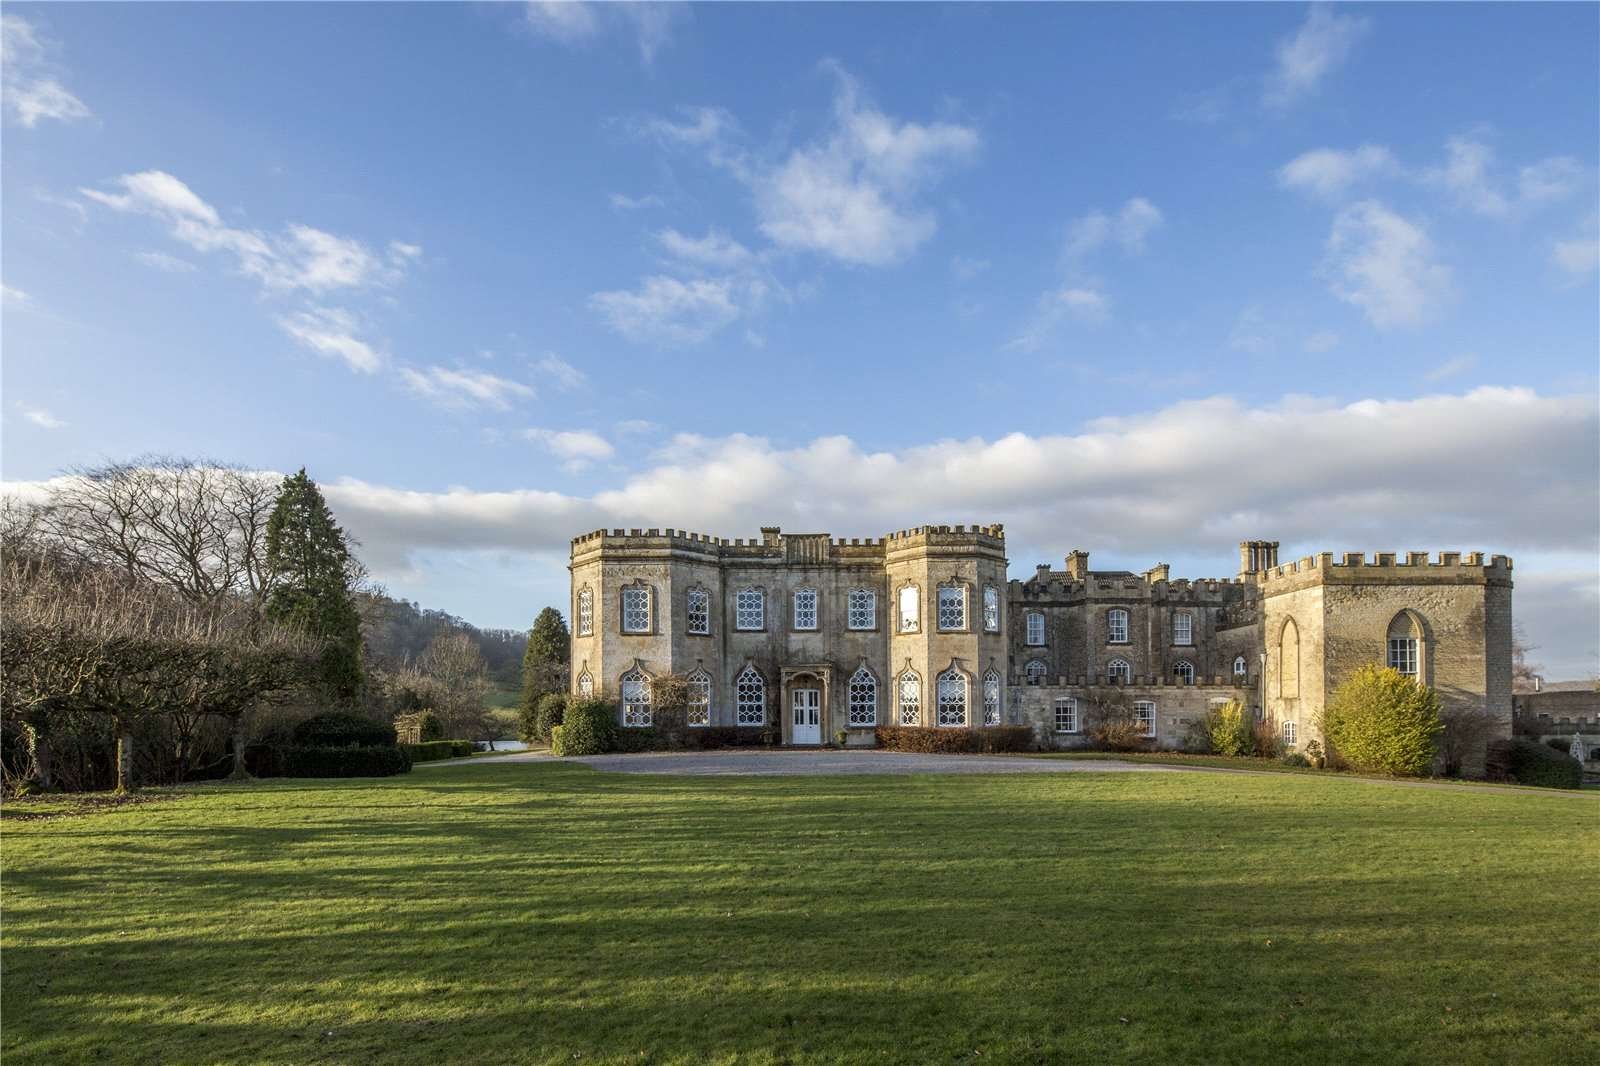 Francis York Rare Georgian Gothic-Style Country House in the Cotswolds is Under Offer  2.jpg